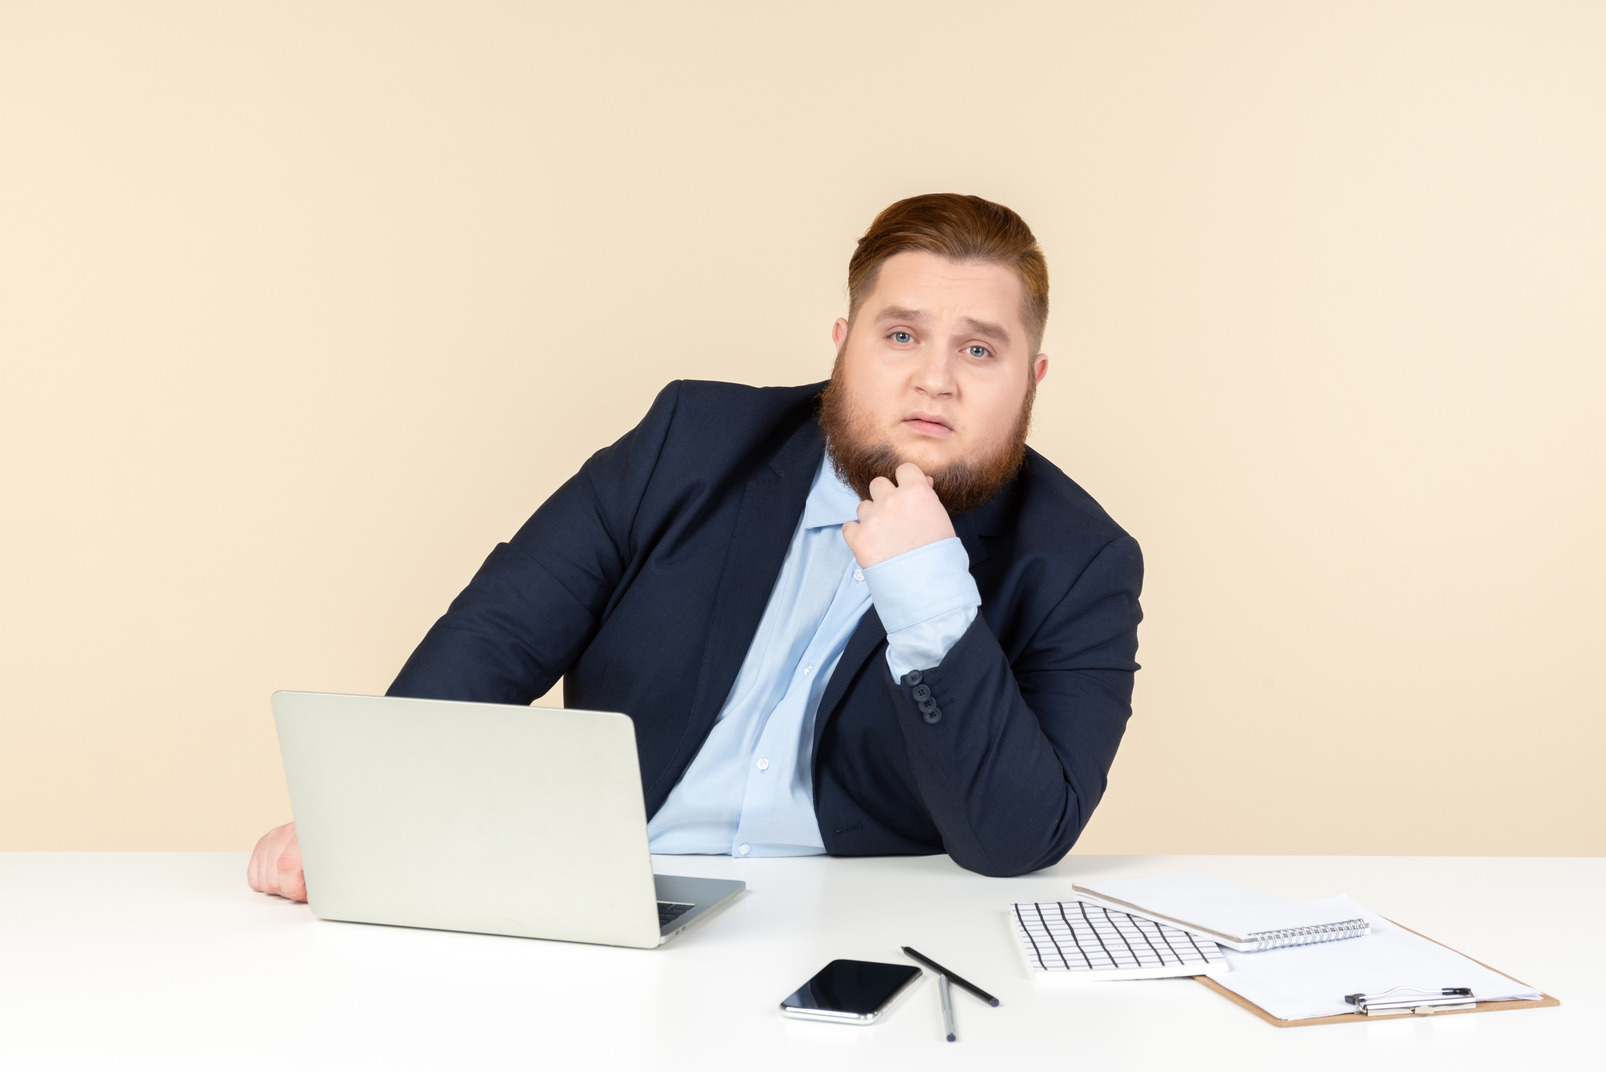 Pensive young overweight office worker sitting at office desk